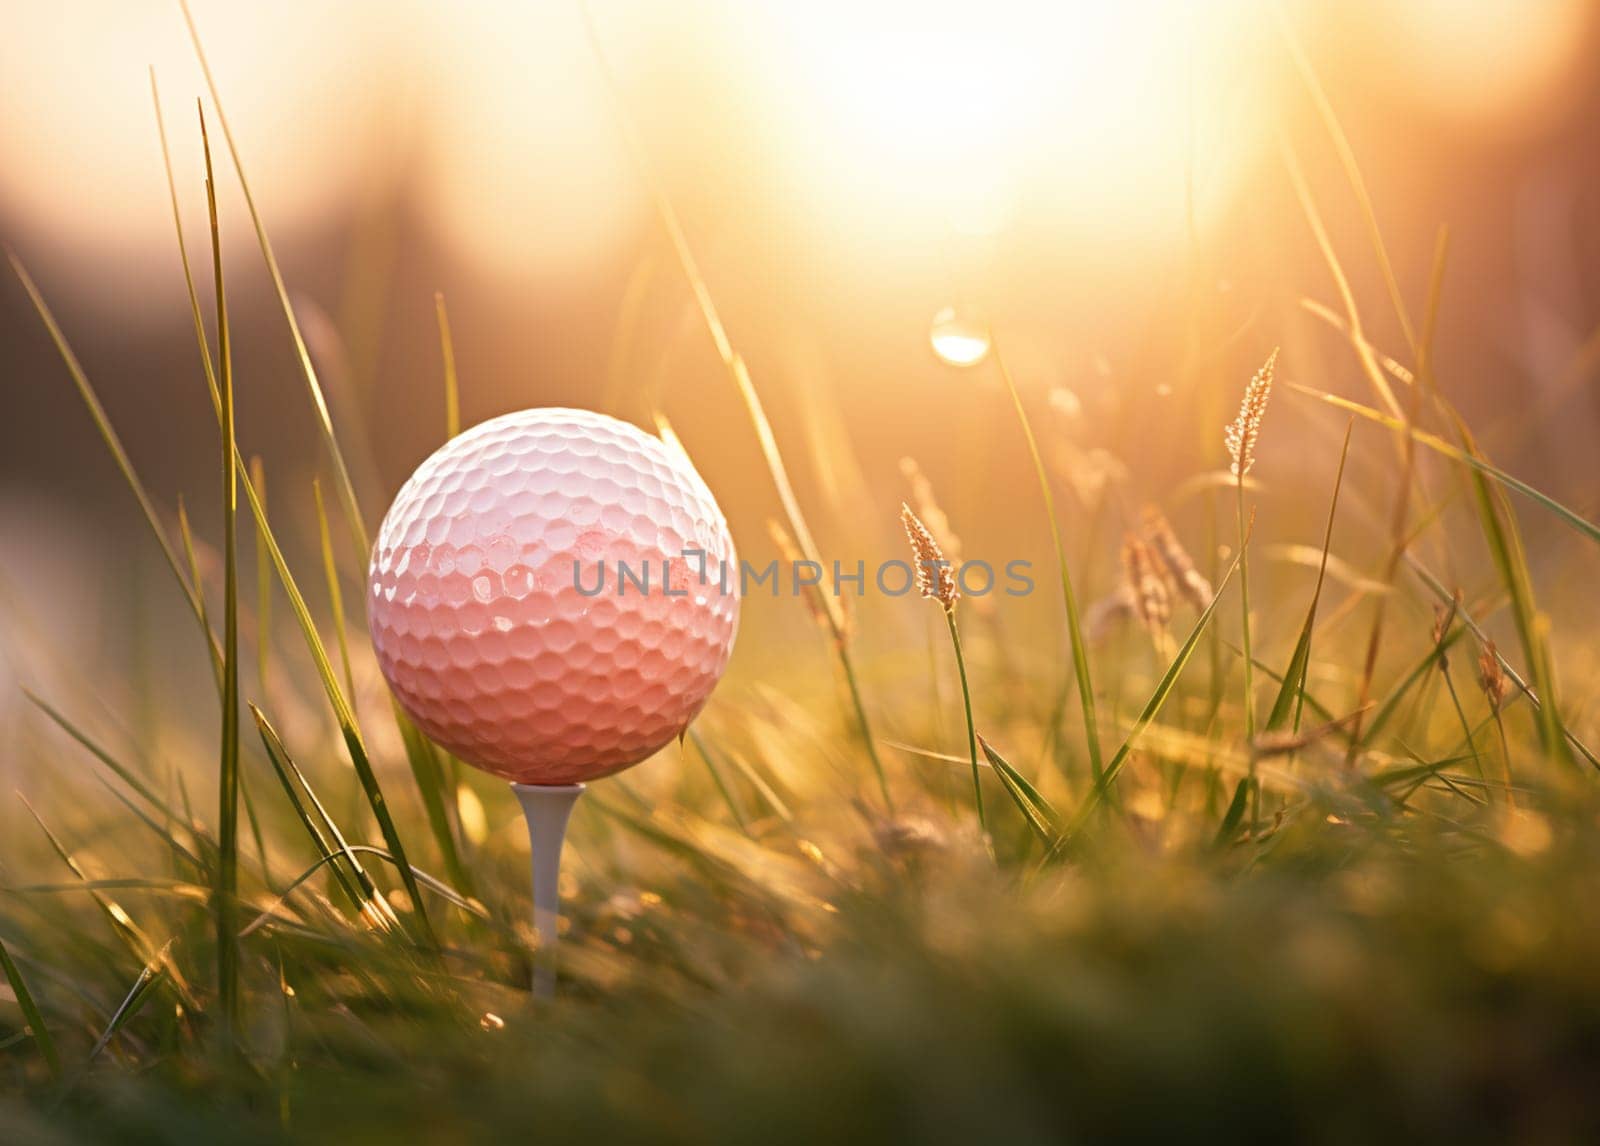 Golf club and ball in grass by Andelov13